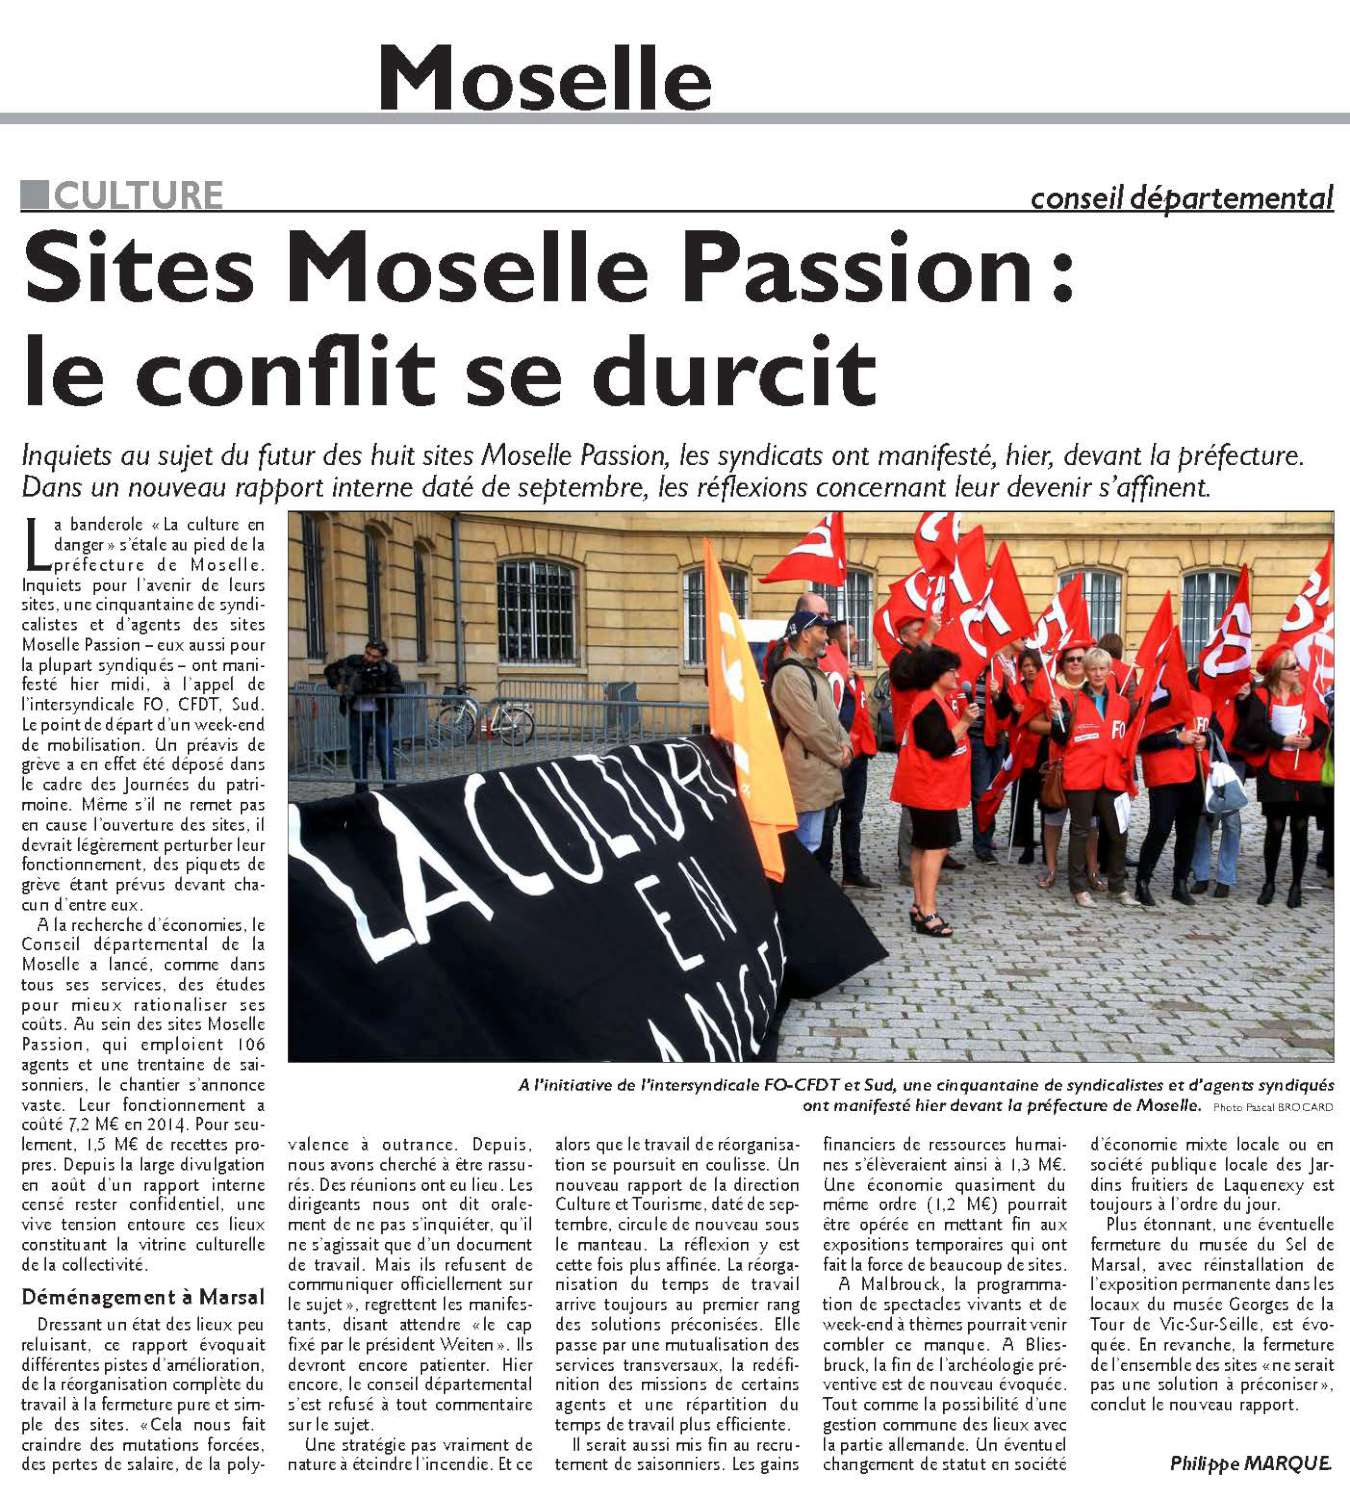 moselle passion 19 09 2015 1500